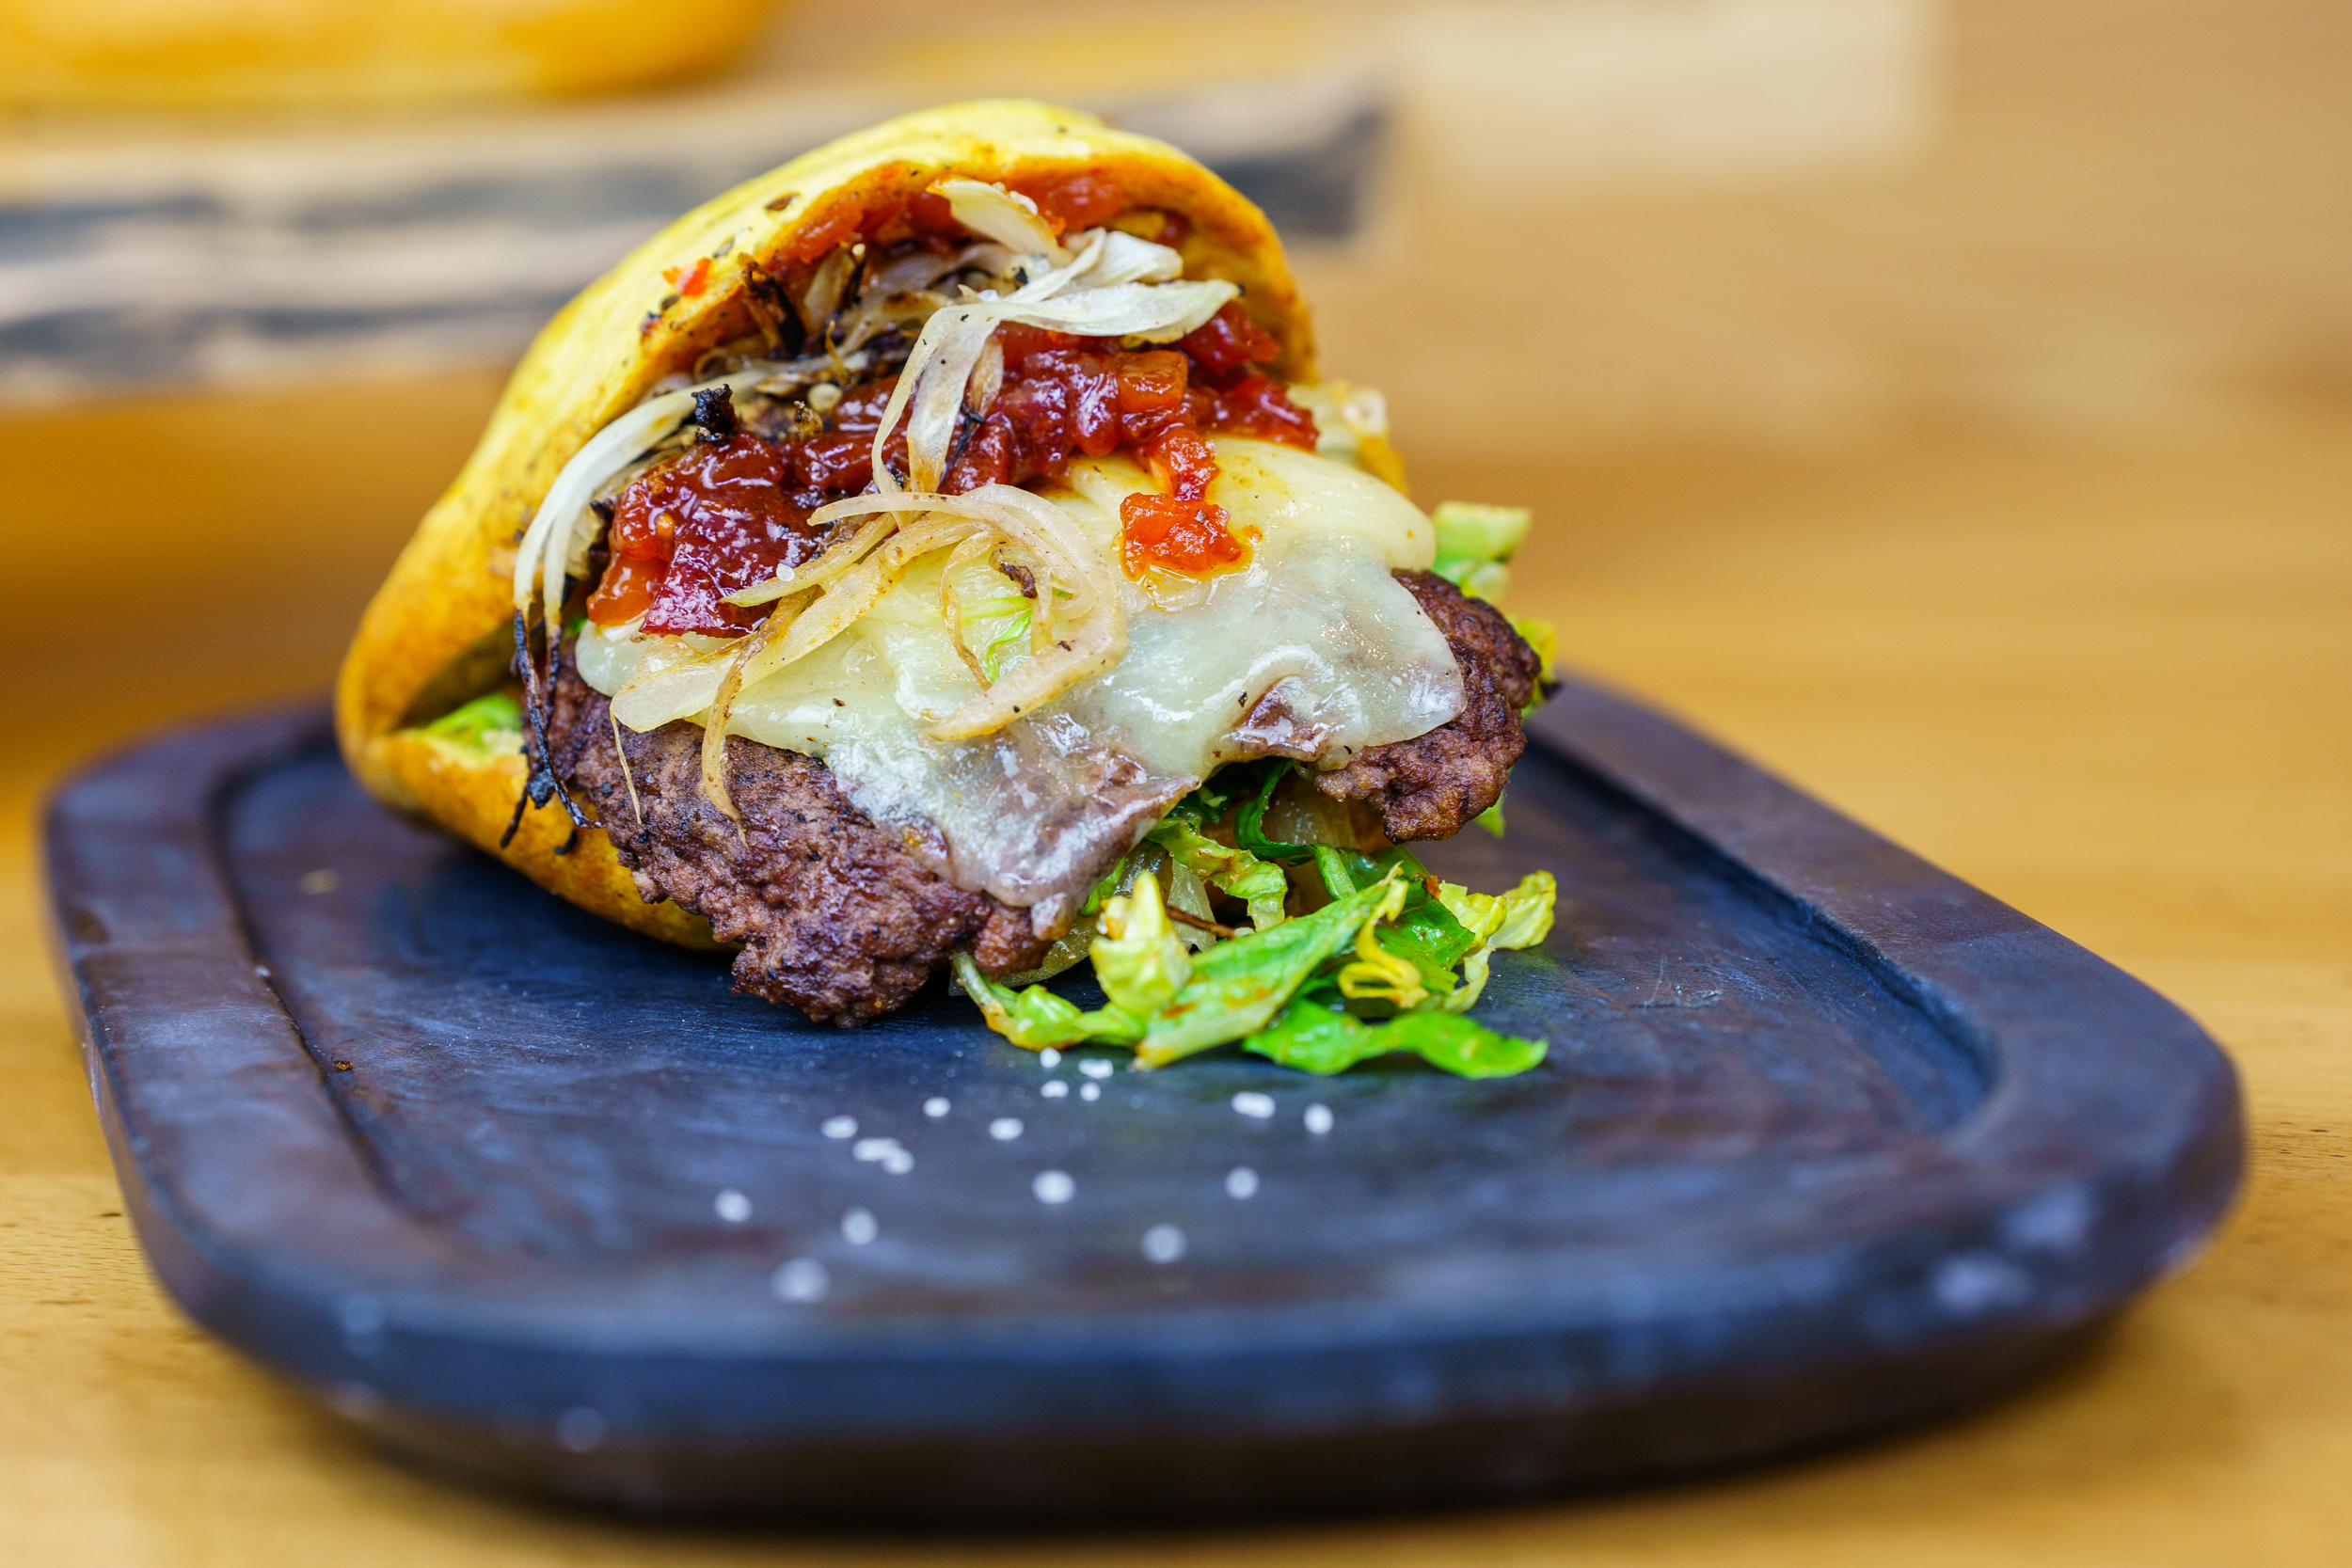 An open-faced burger with saucy toppings laid out on a black slate serving platter.